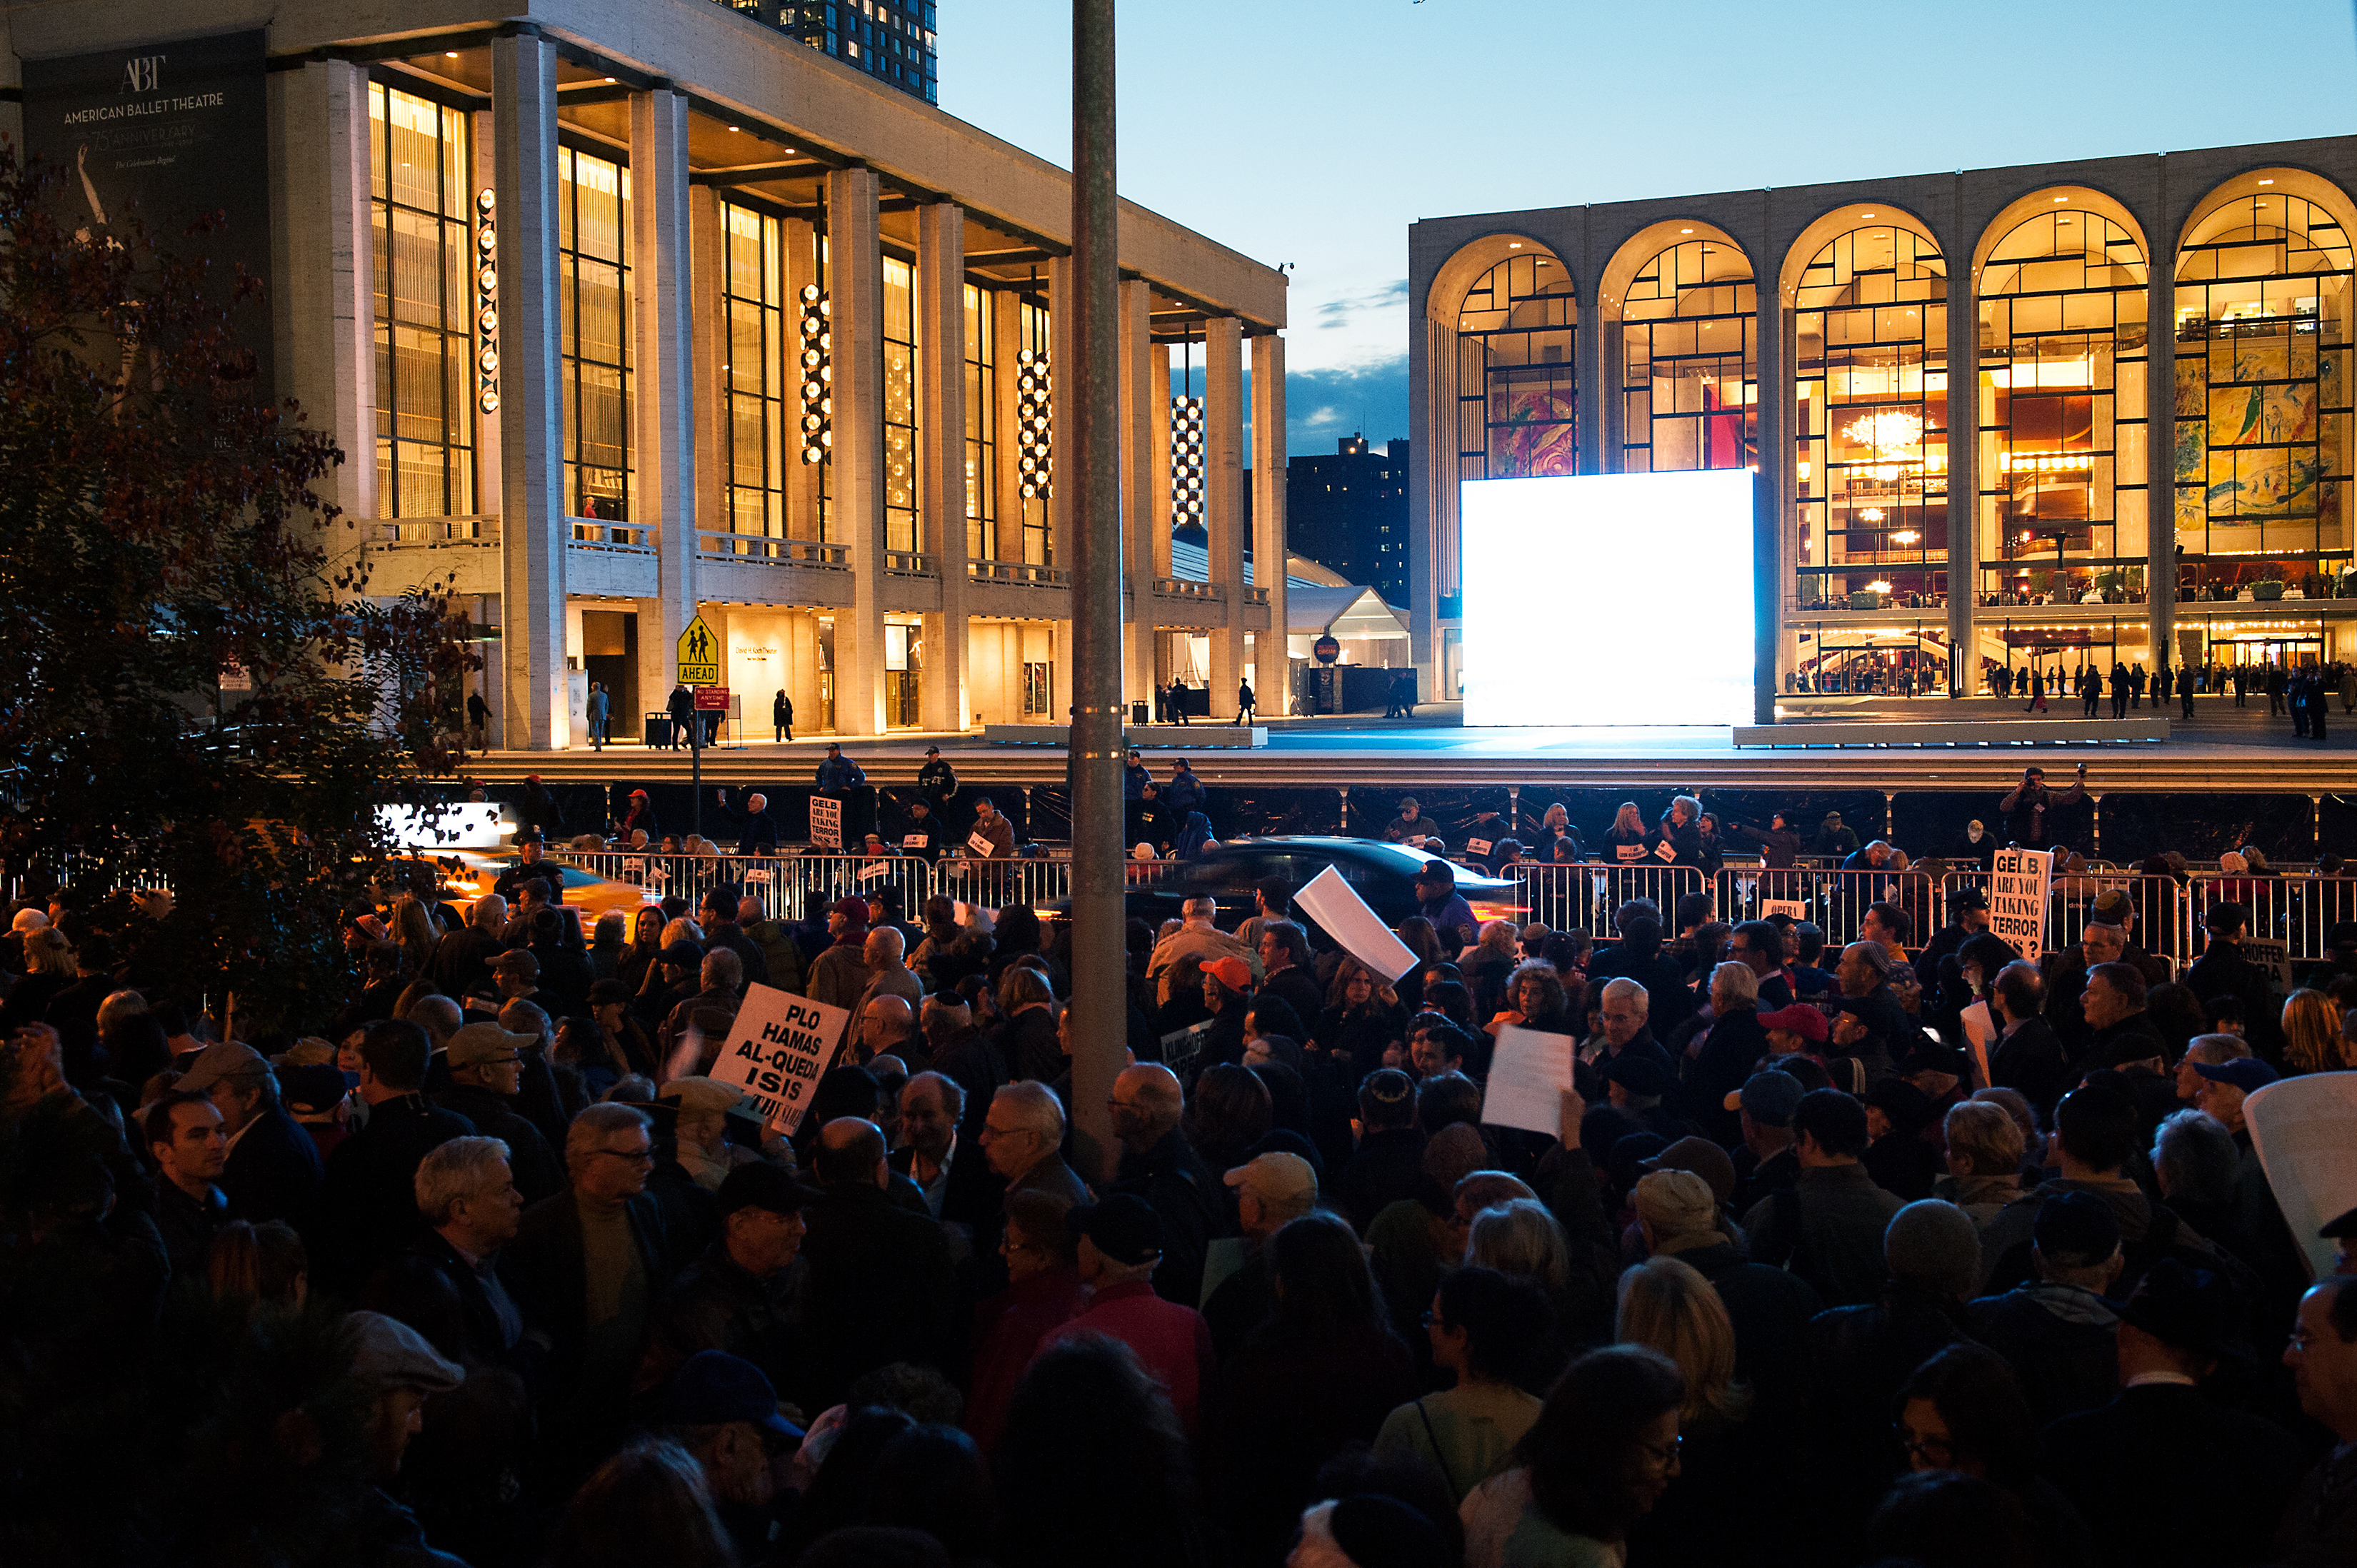 Protestors hold signs outside the Metropolitan Opera at Lincoln Center on opening night of the opera, "The Death of Klinghoffer" on October 20, 2014 in New York City. The opera has been accused of anti-Semitism and demonstrators protested its inclusion in this year's schedule at the Metropolitan Opera. (Bryan Thomas—Getty Images)